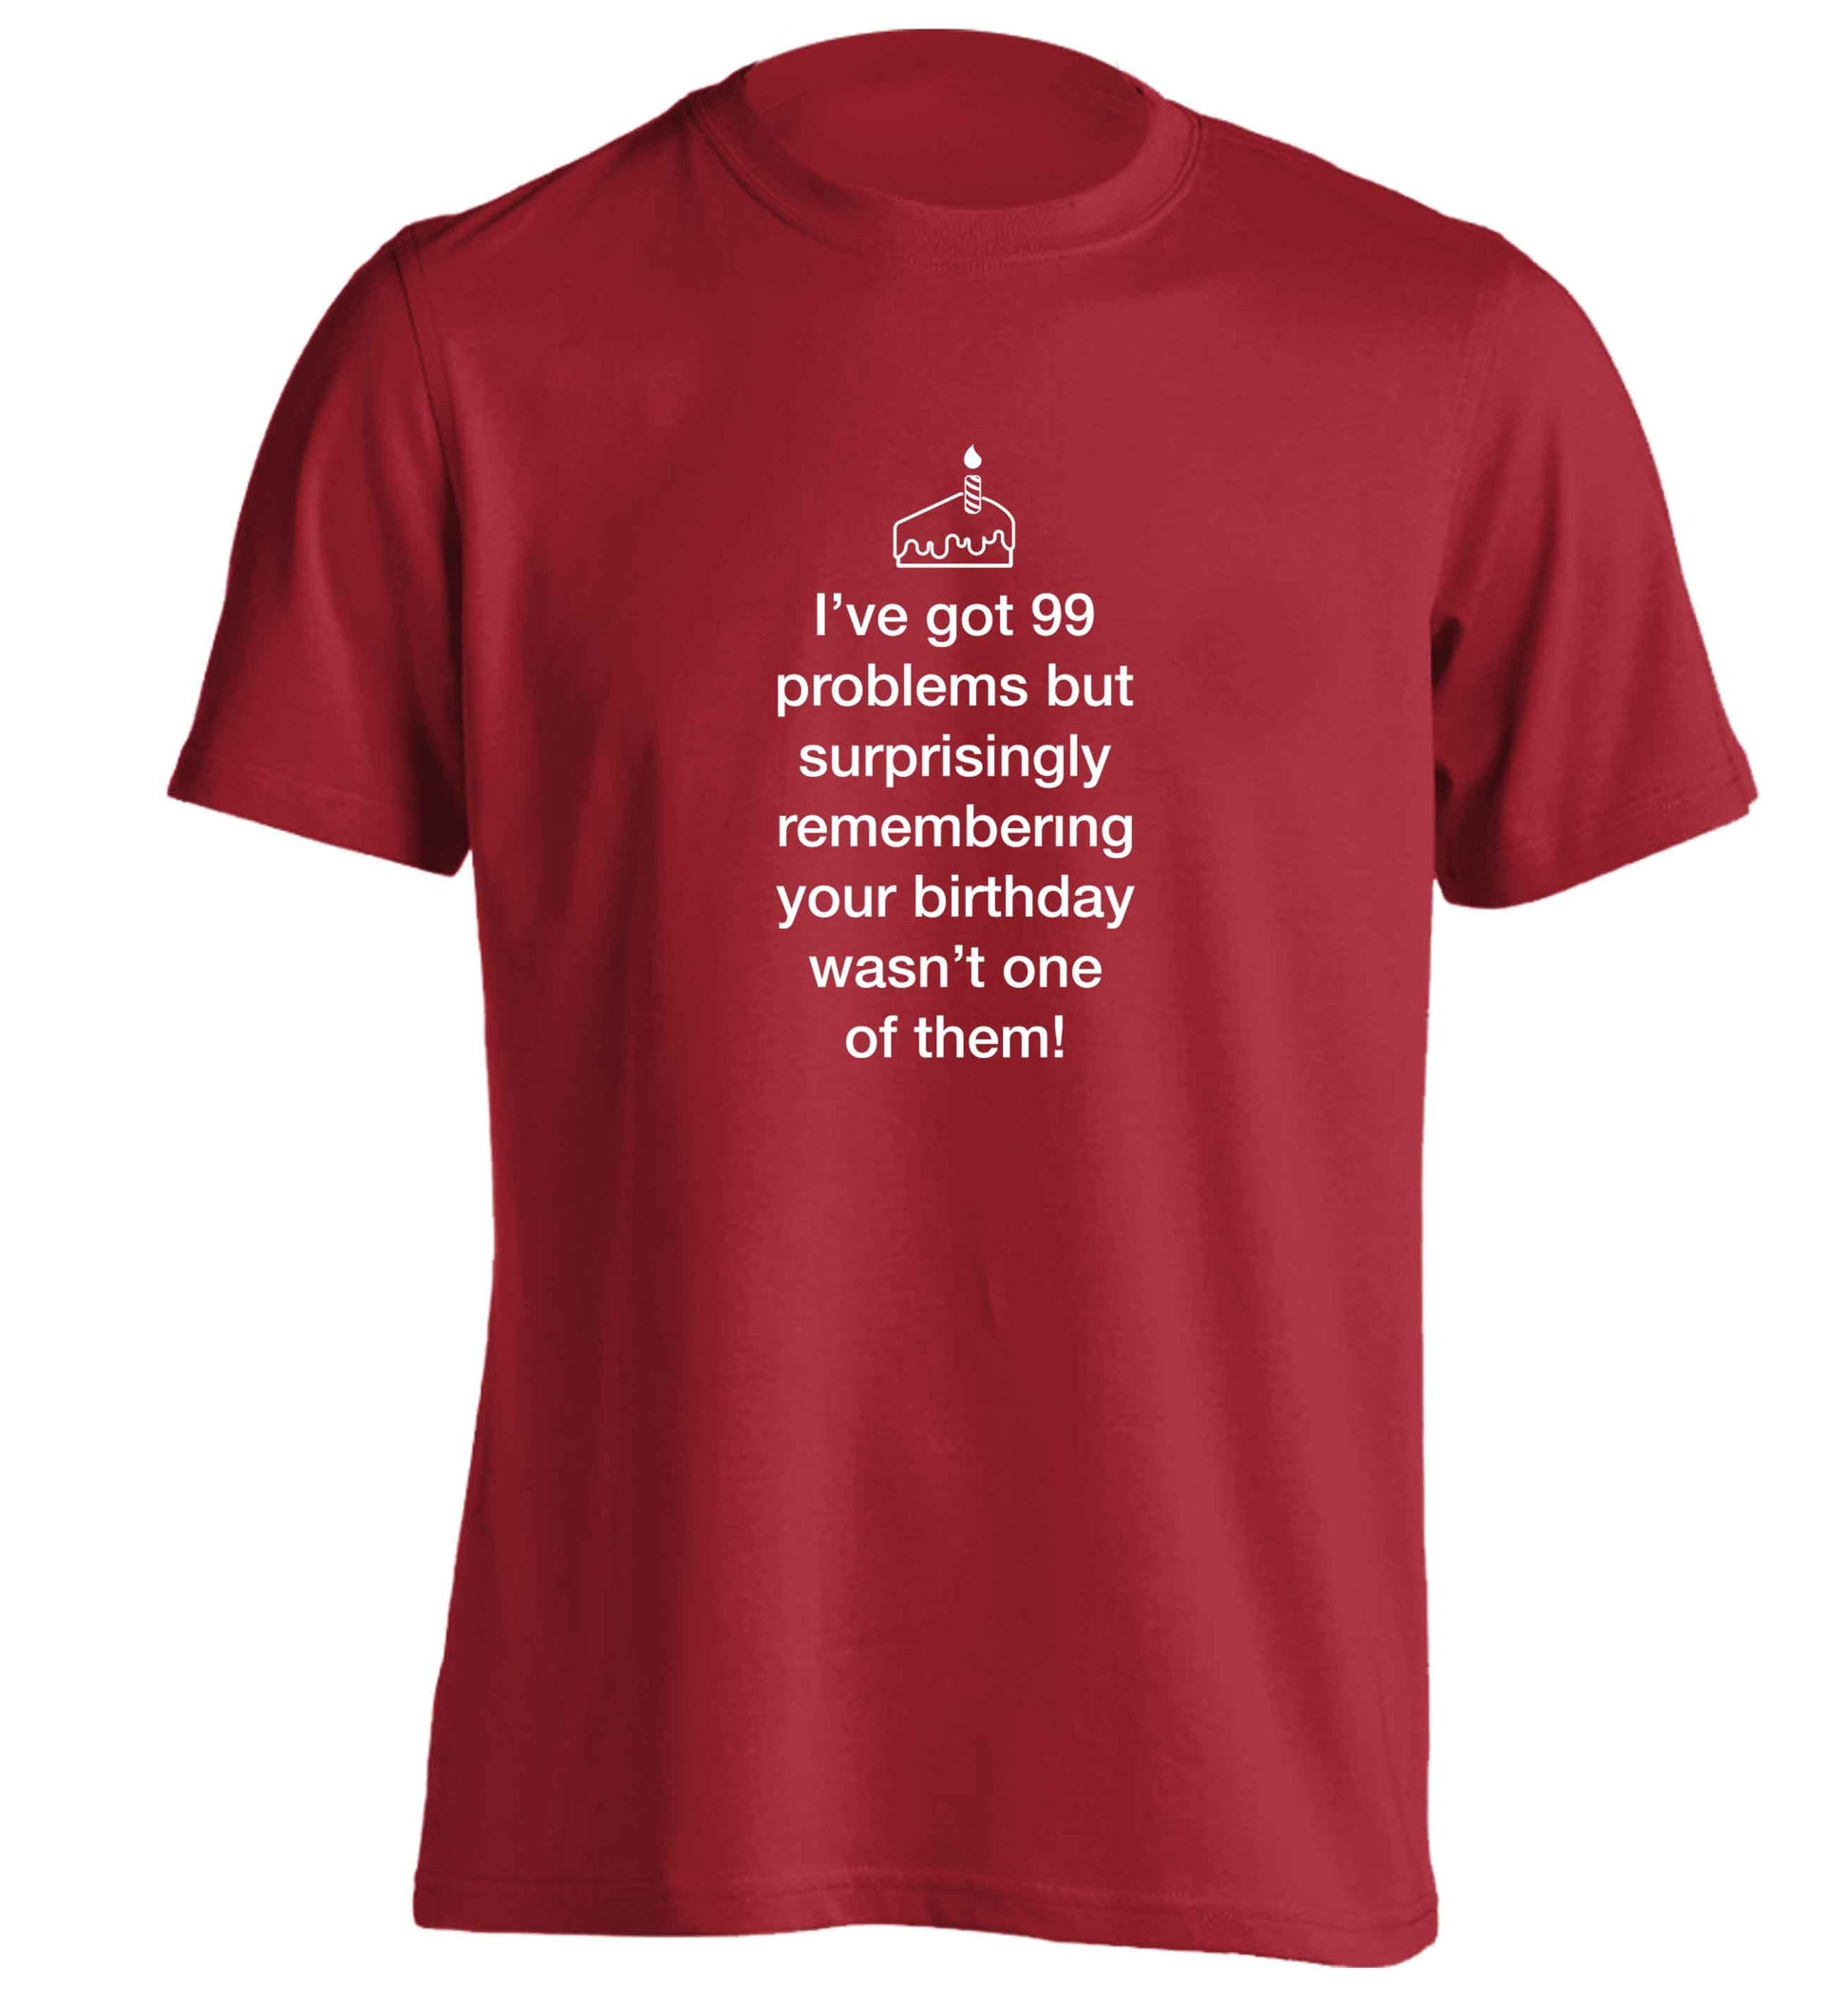 I've got 99 problems but surprisingly remembering your birthday wasn't one of them! adults unisex red Tshirt 2XL